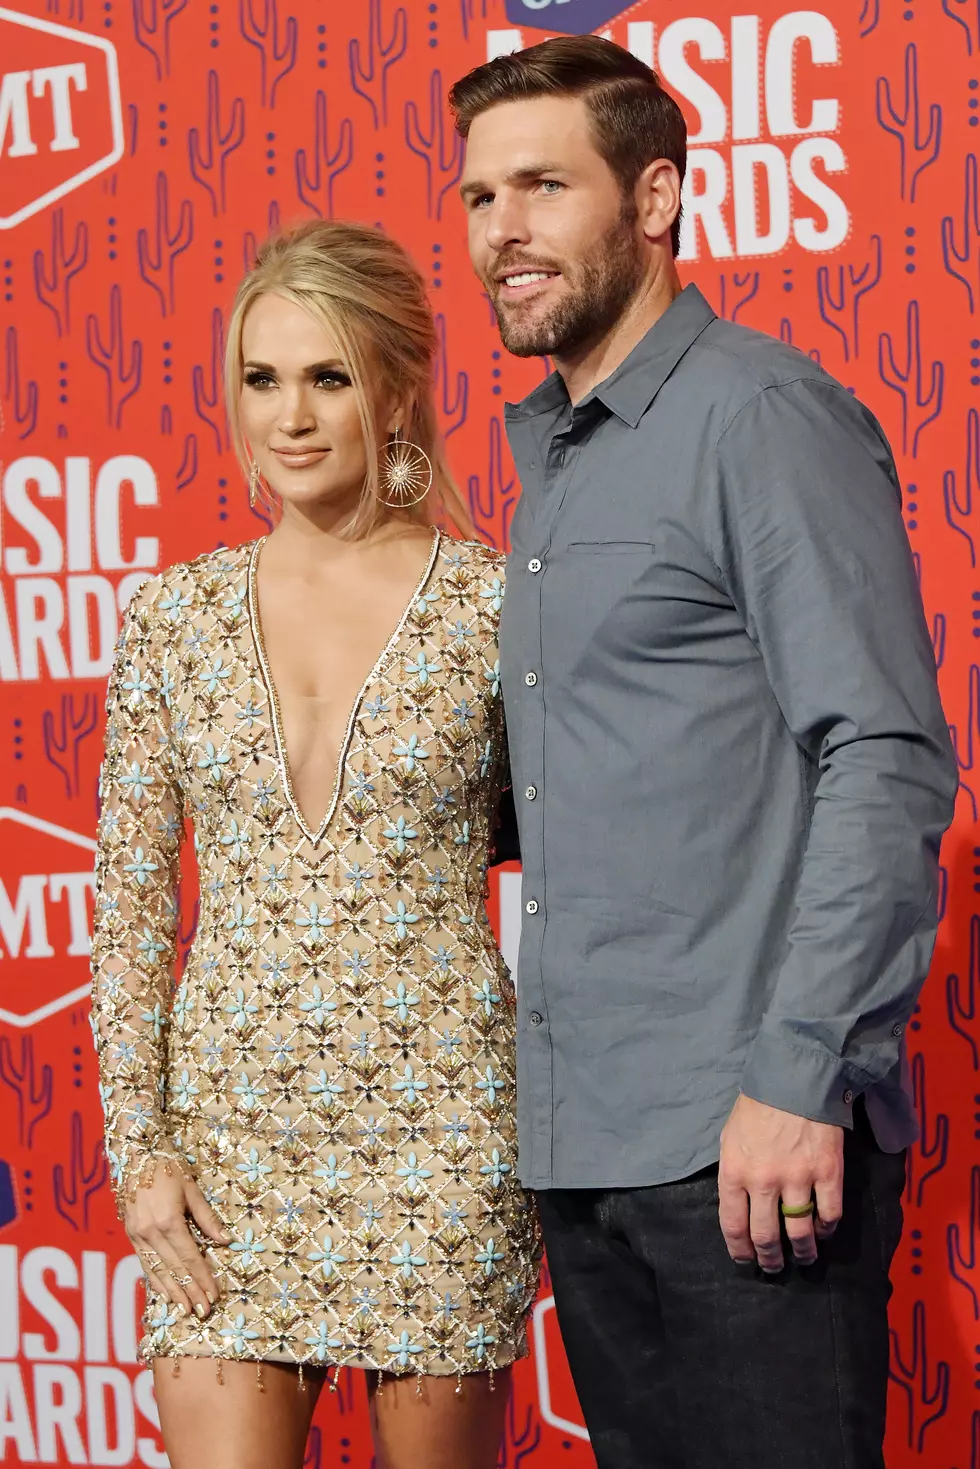 Carrie Underwood Brings Husband Mike Fisher To CMA Awards 2021